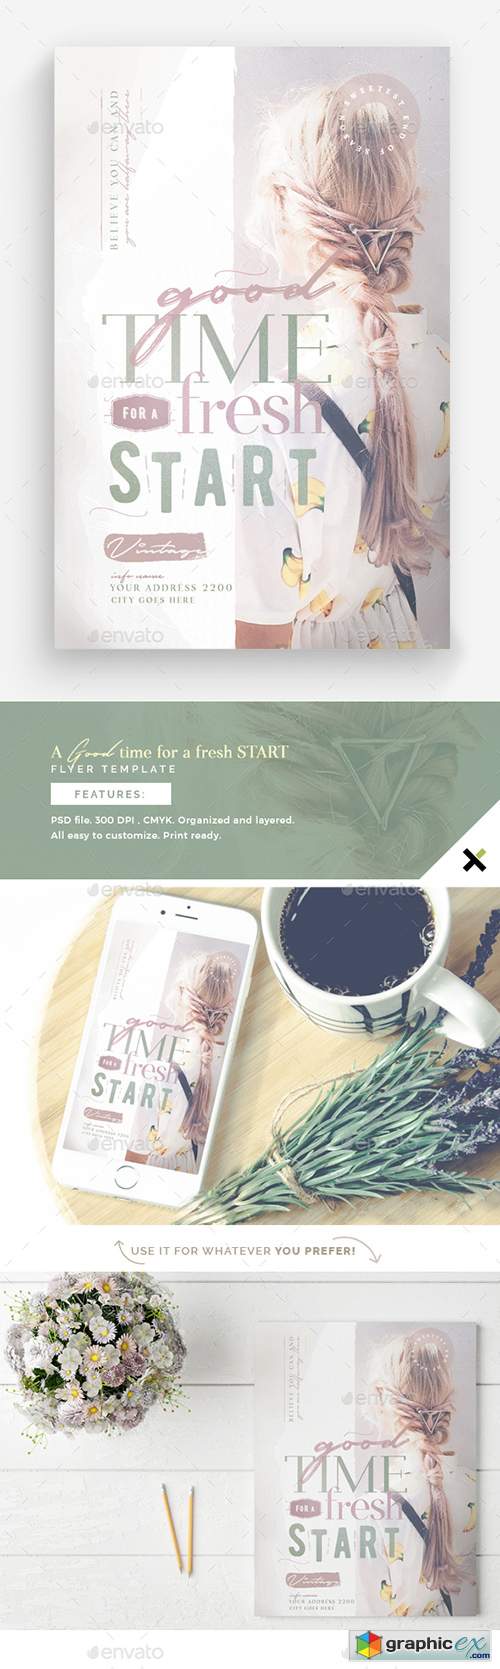 A Good Time For A Fresh Start Flyer Template